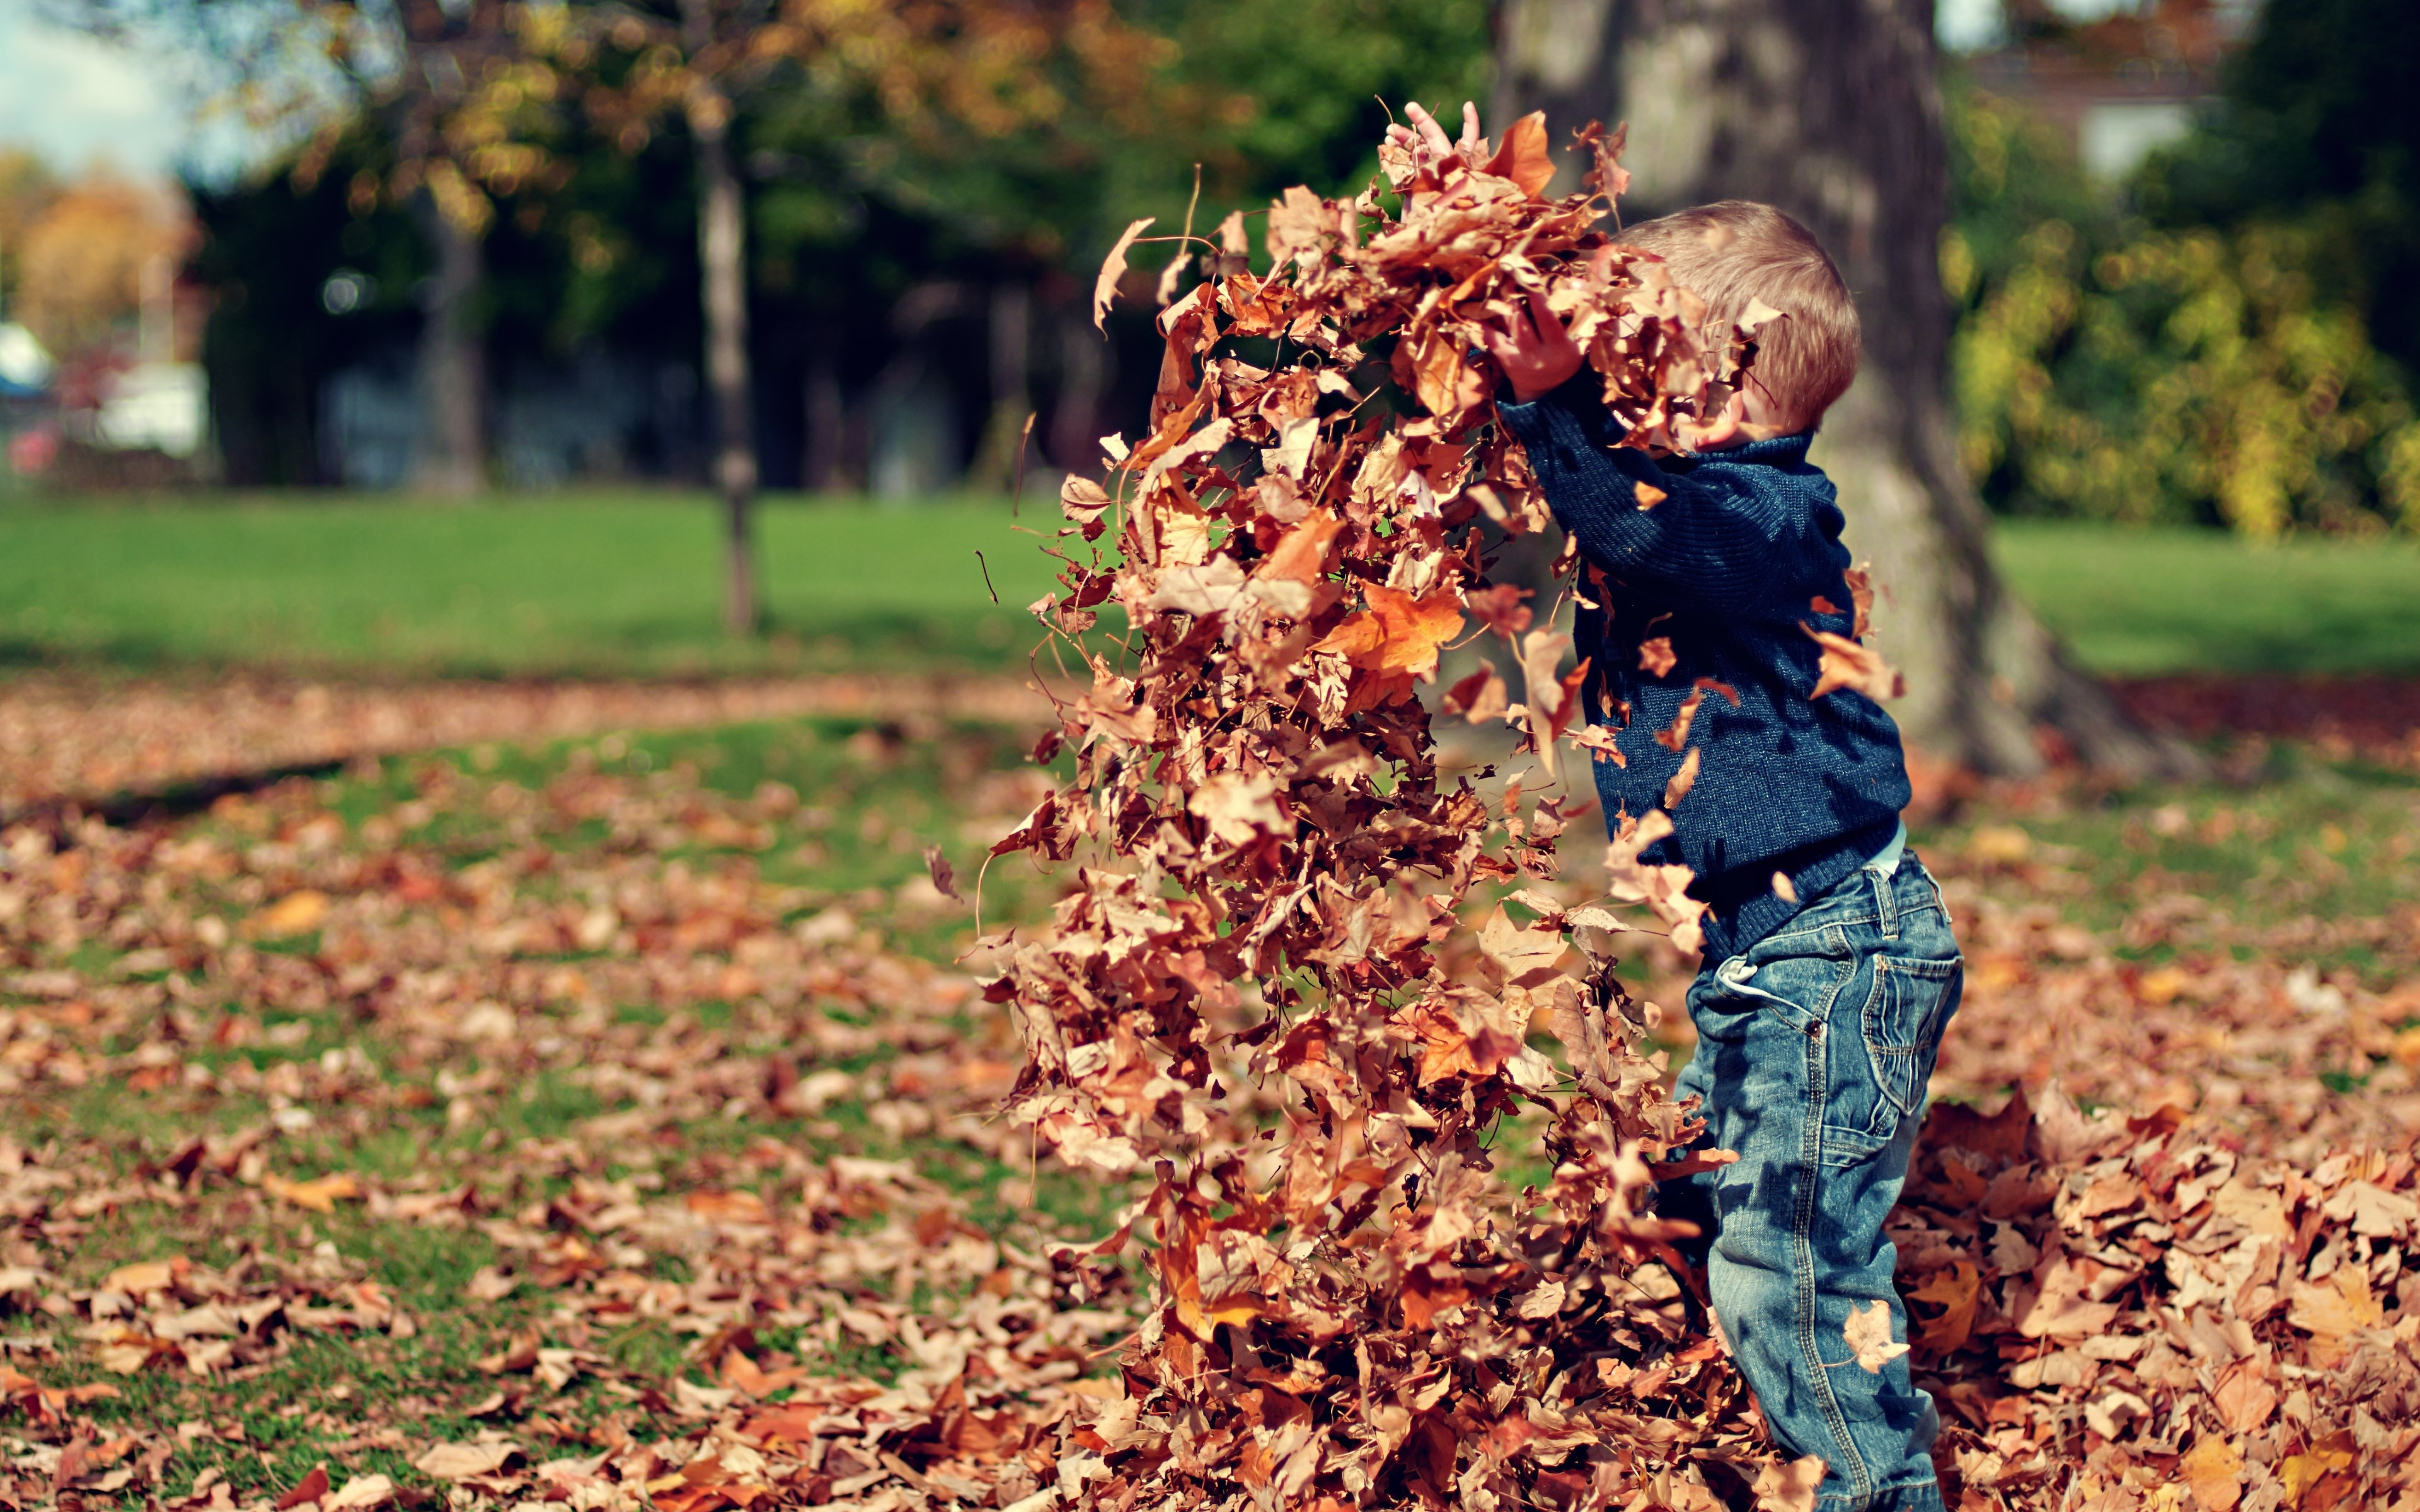 The child is playing with leaves wallpaper 3840x2400